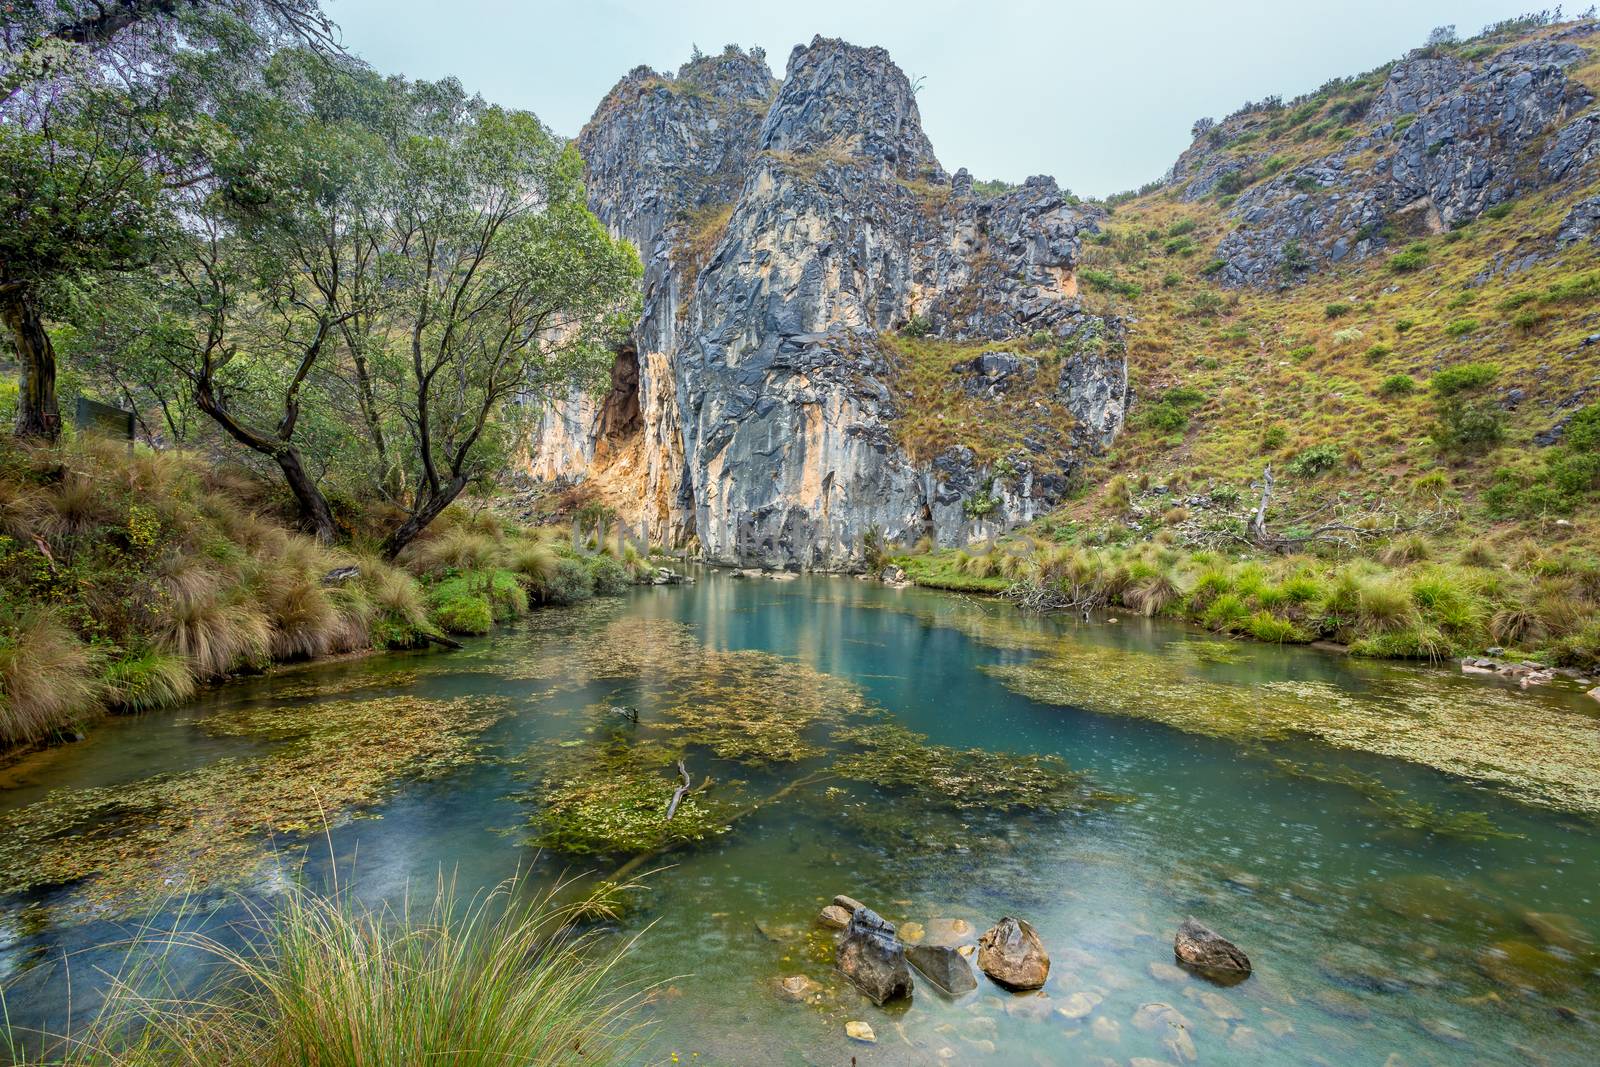 Beautiful gorges of Kosciuszko National Park with vivid blue waters from creeks high in calcium carbonate and other minerals